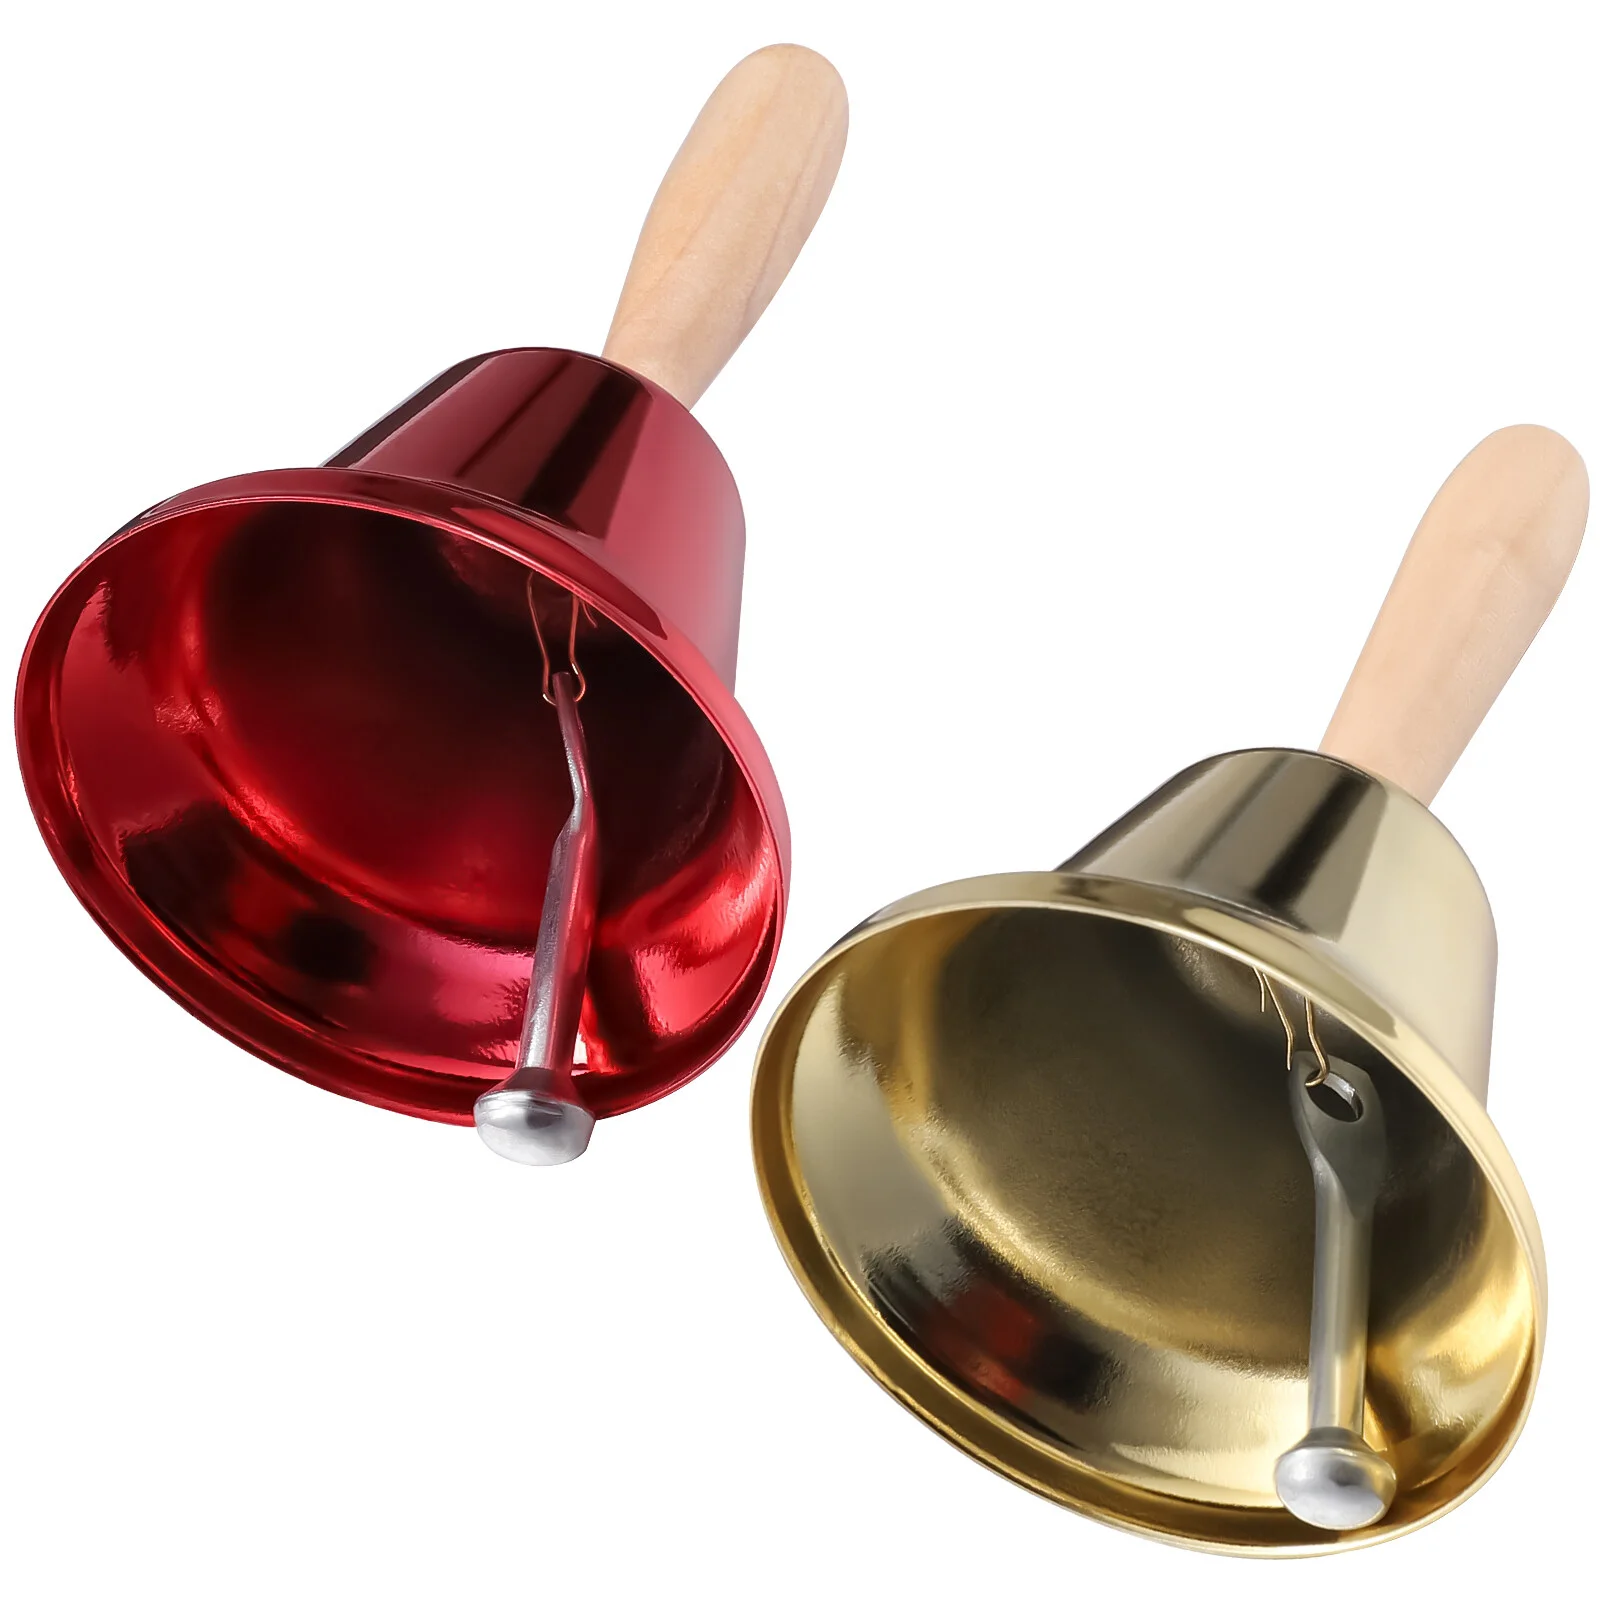 

Amosfun 2Pcs Jingle Bell Wooden Handle Metal Loud Bell Restaurant Call Bell Hand Bell Multi-Purpose for Party School Hotel